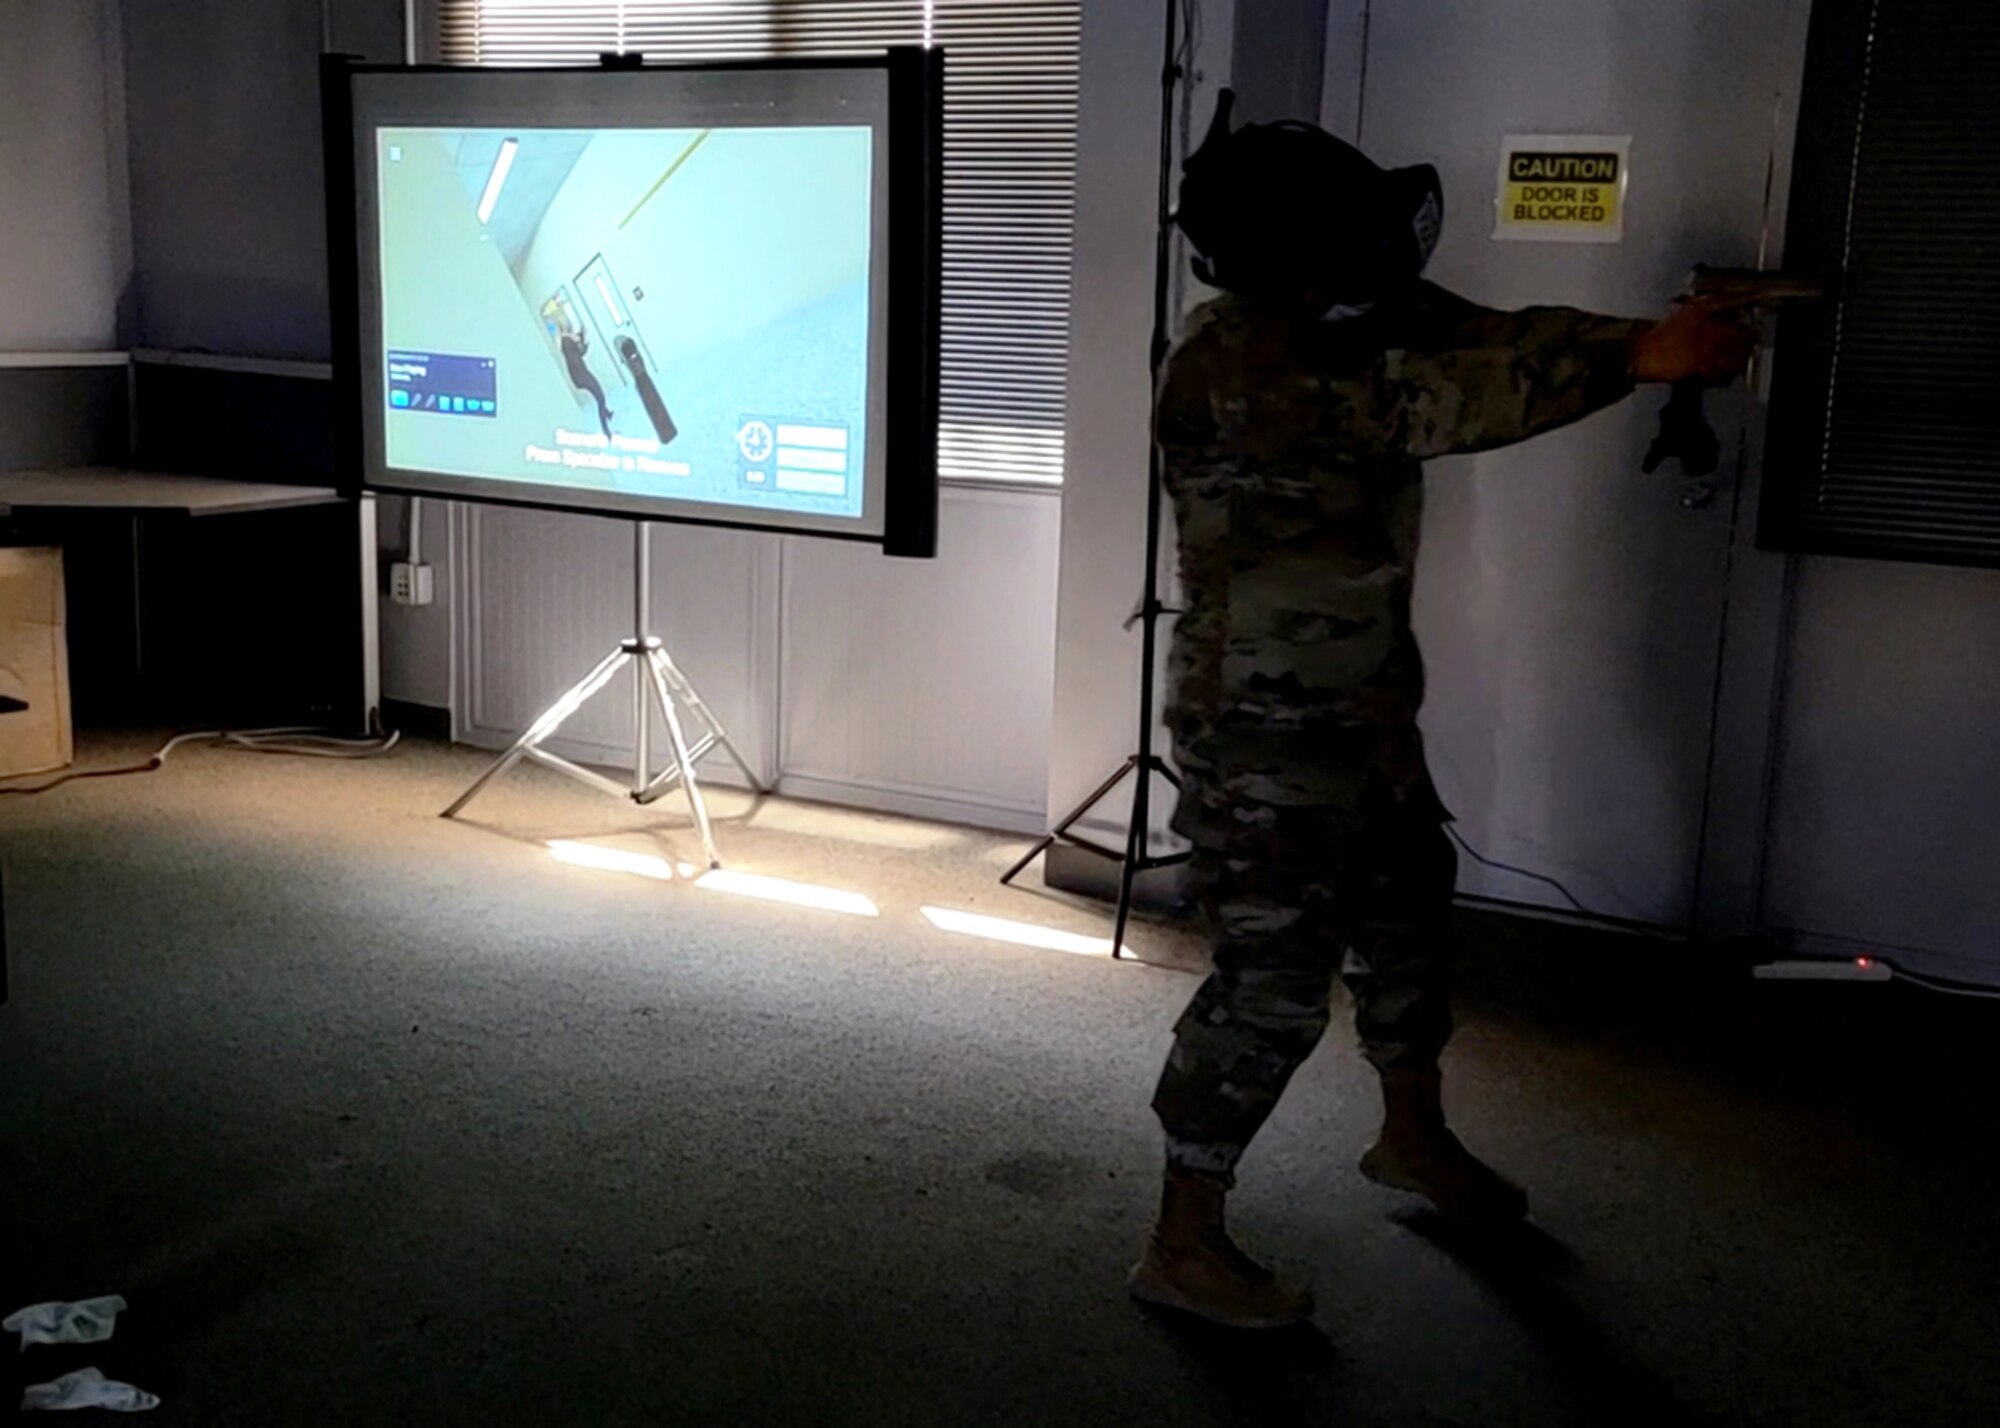 The 926th Security Forces Squadron is the first reserve component to incorporate virtual reality into their Use of Force training during the Mandatory Unit Training Assembly, Oct. 4, at Nellis Air Force Base, Nevada. (U.S. Air Force Photo by Staff Sgt. Paige Yenke)